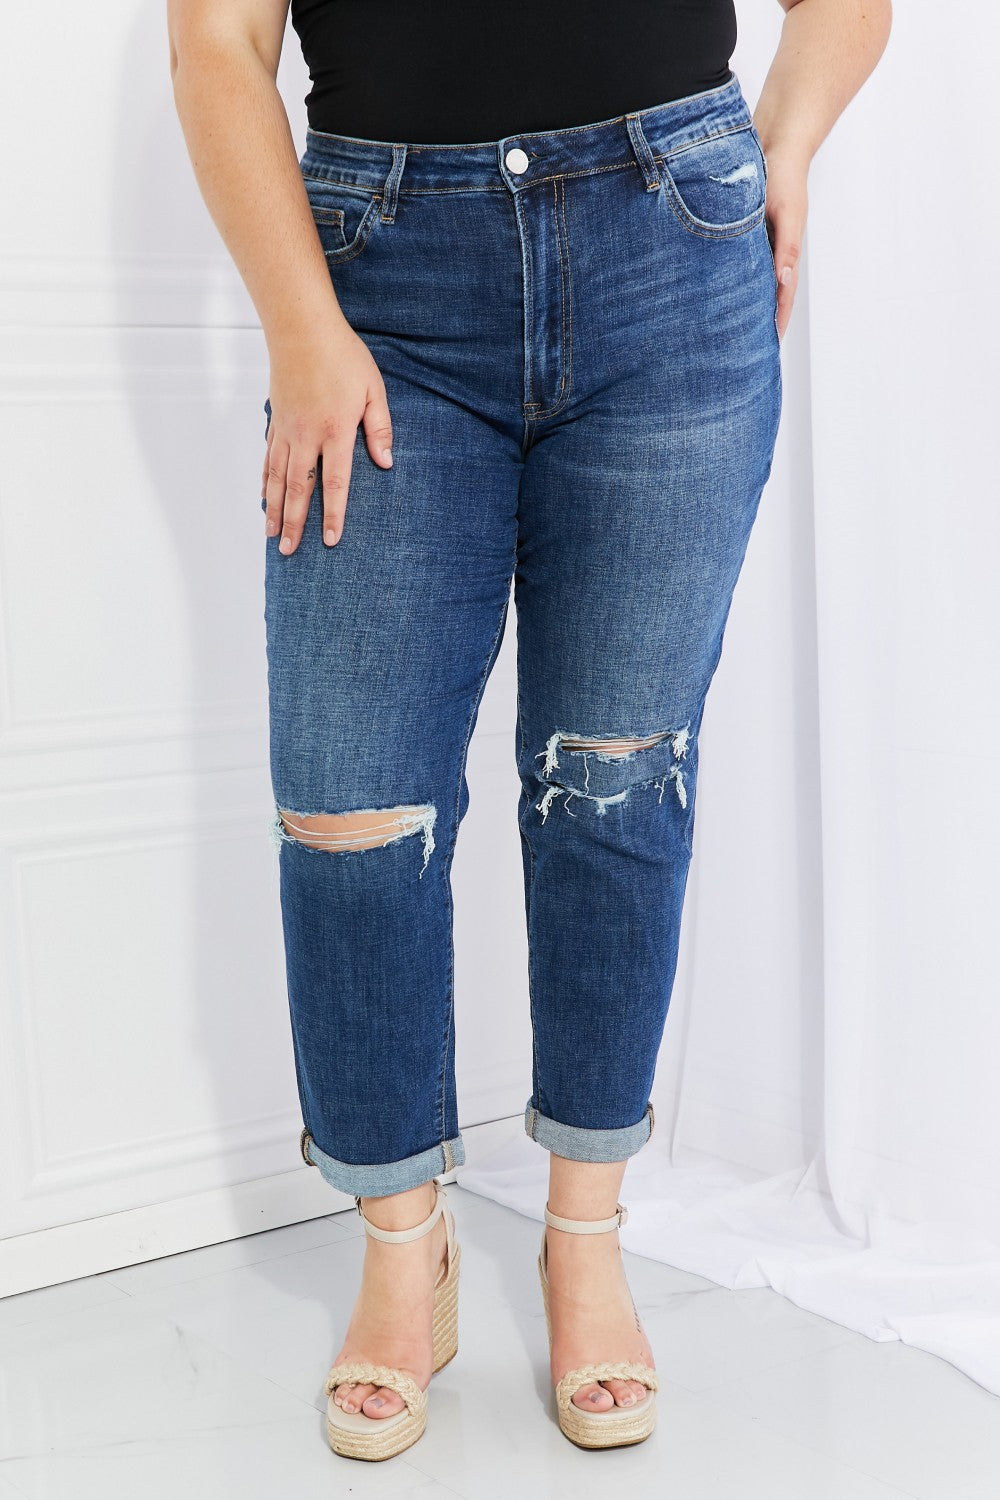 VERVET Distressed Cropped Jeans with Pockets